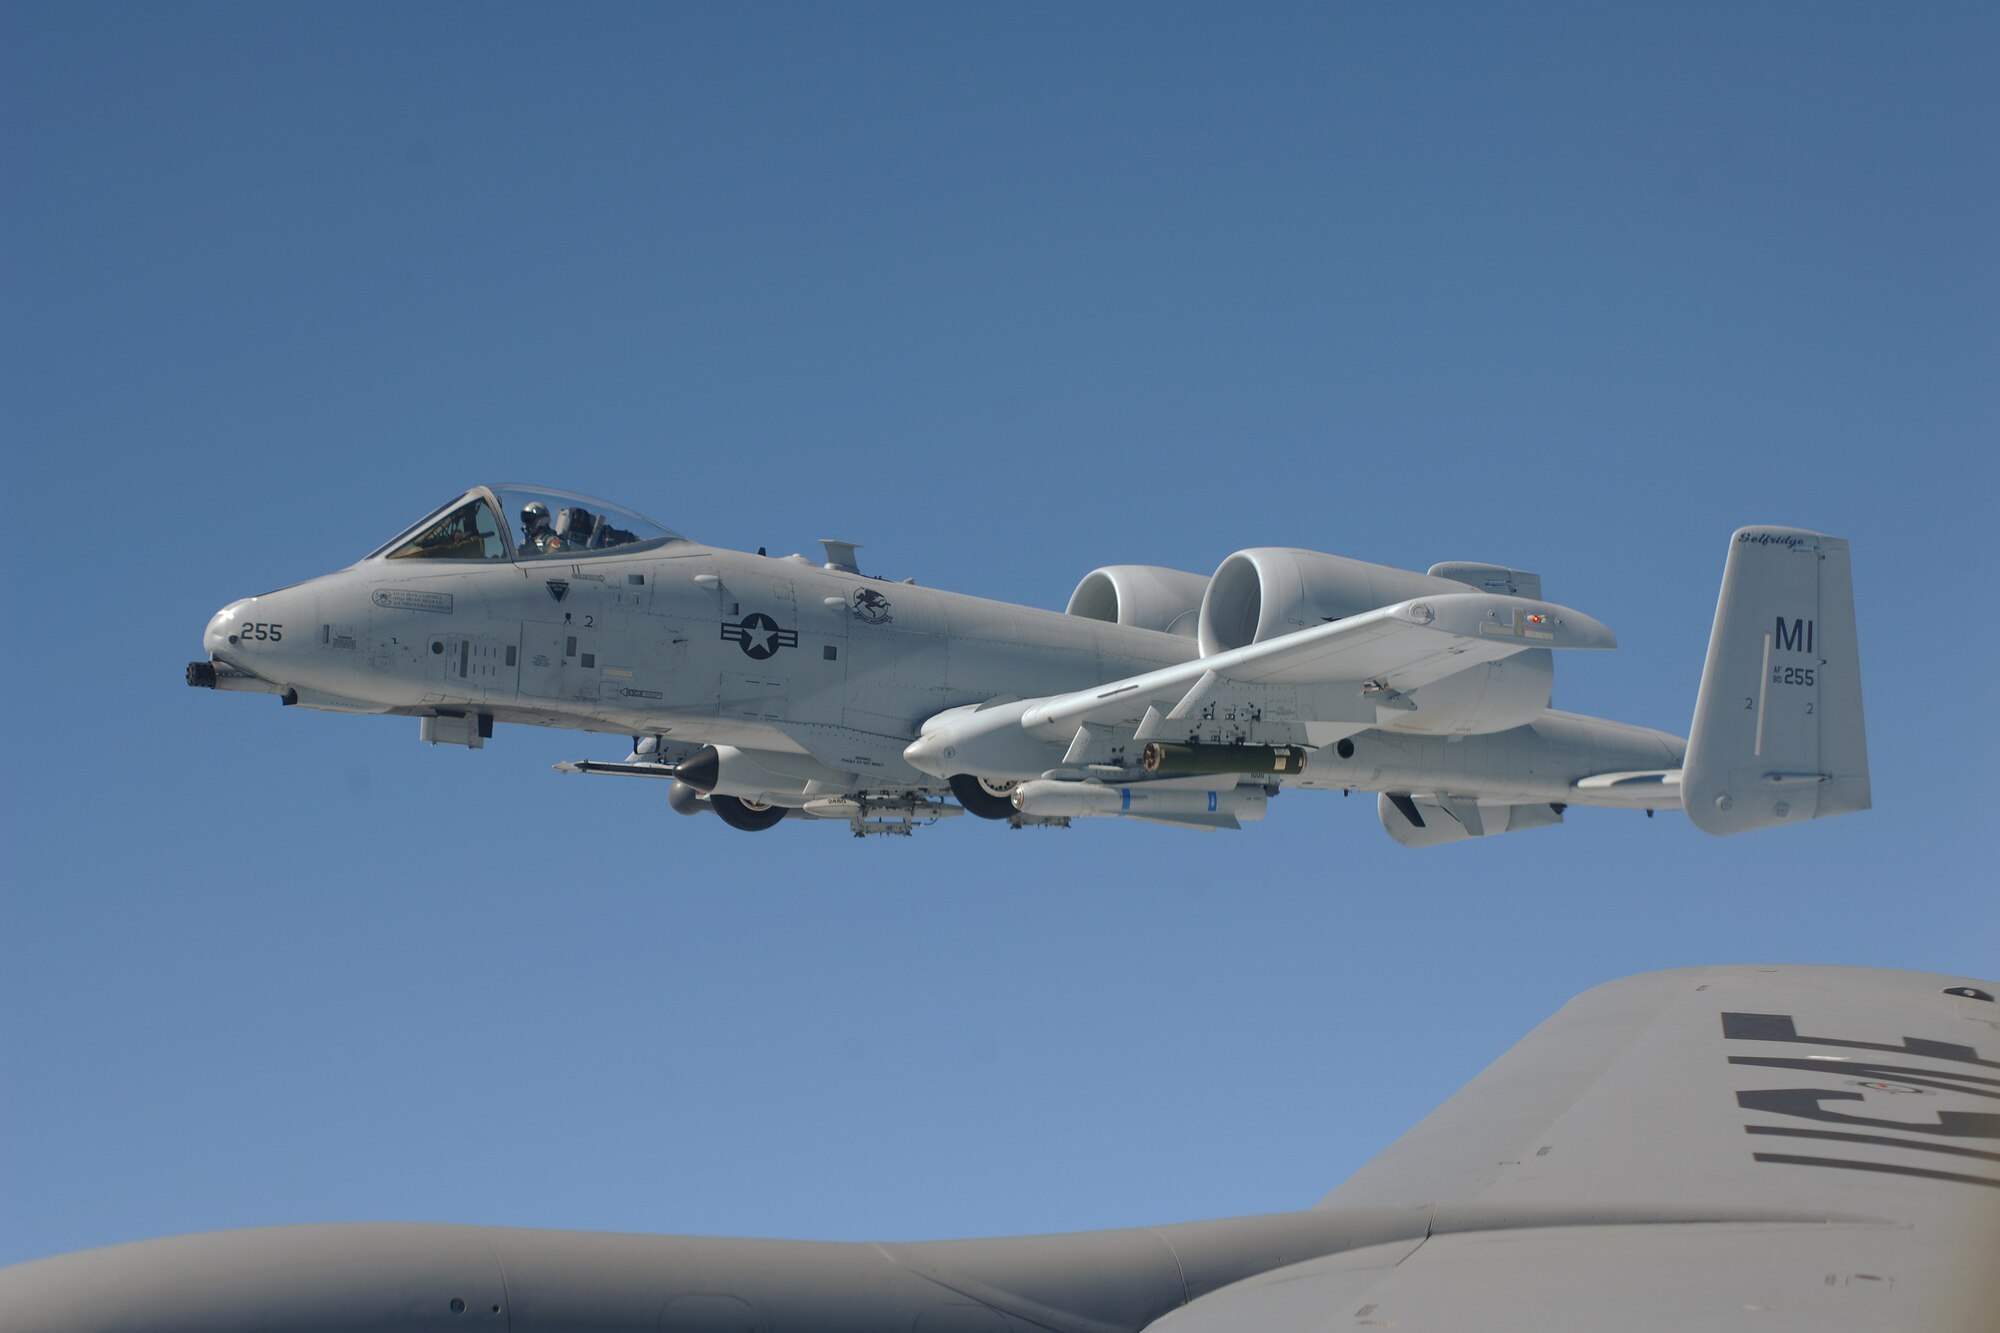 An A-10 Thunderbolt II flies alongside a KC-135 Stratotanker while the A-10’s wingman receives fuel from the tanker, July 21, 2011. All of the aircraft are assigned to the 127th Wing of the Michigan Air National Guard and are based at Selfridge Air National Guard Base, Mich. (USAF photo by John S. Swanson)